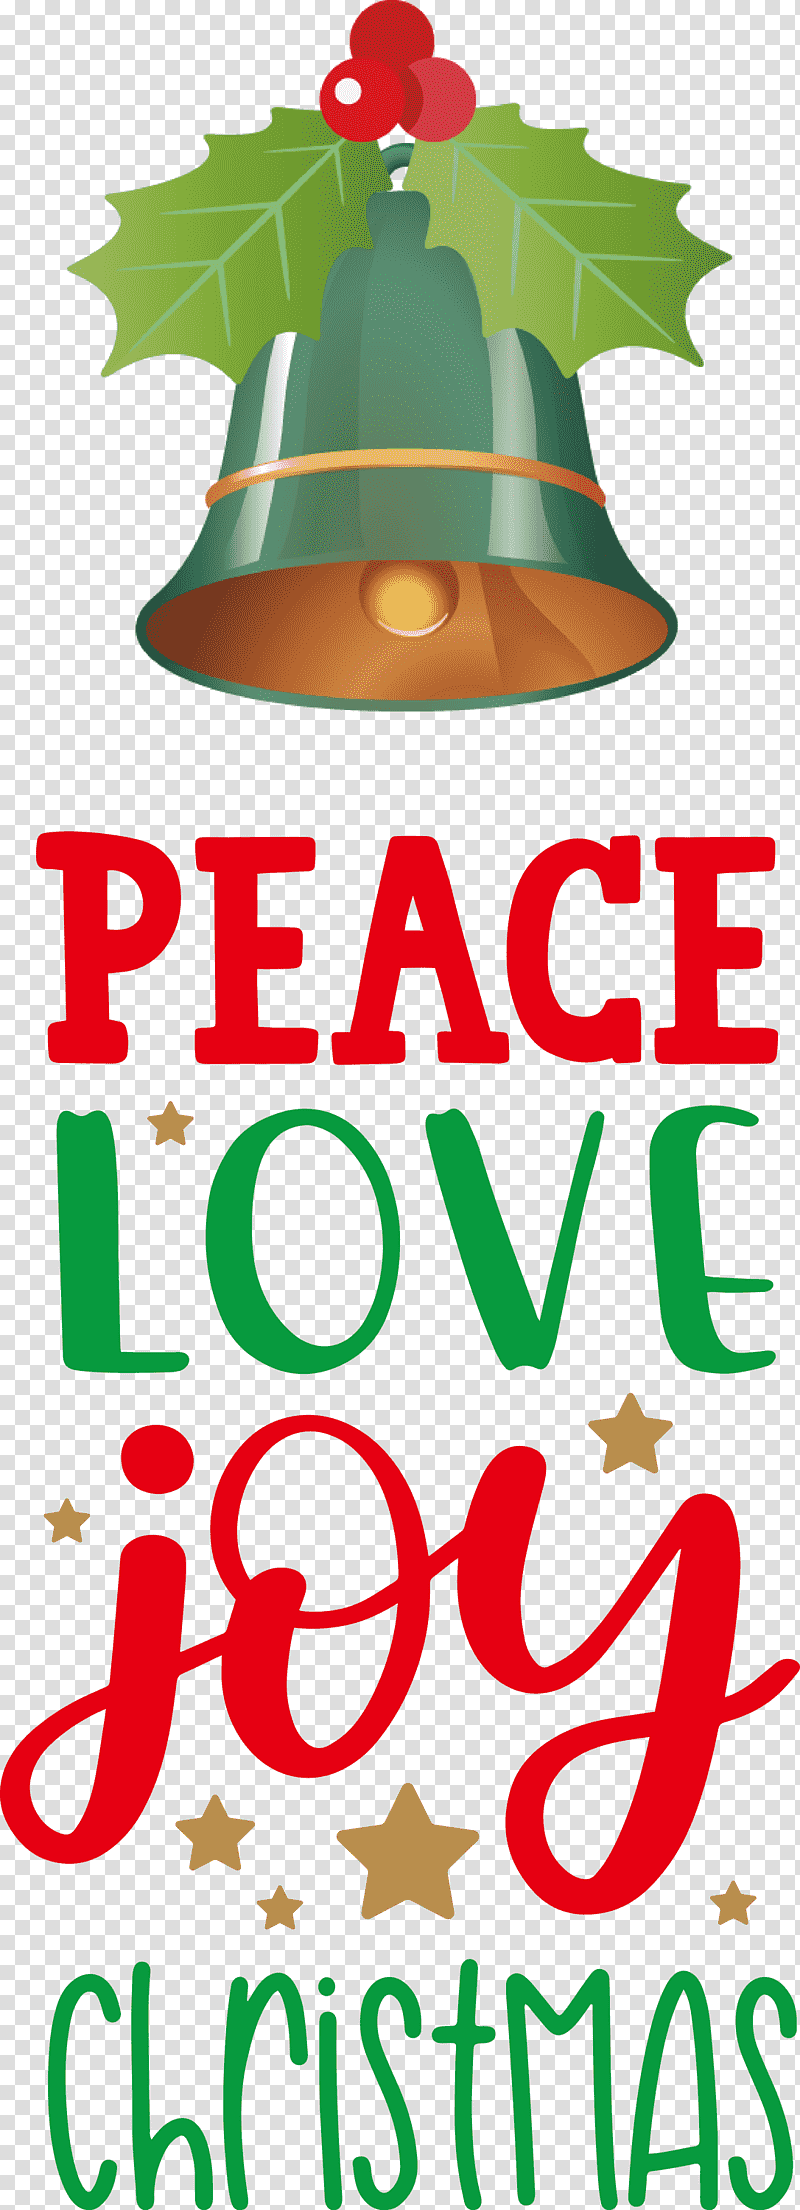 Peace Love Joy, Christmas , Christmas Tree, Christmas Day, Christmas Ornament M, Meter, Line transparent background PNG clipart